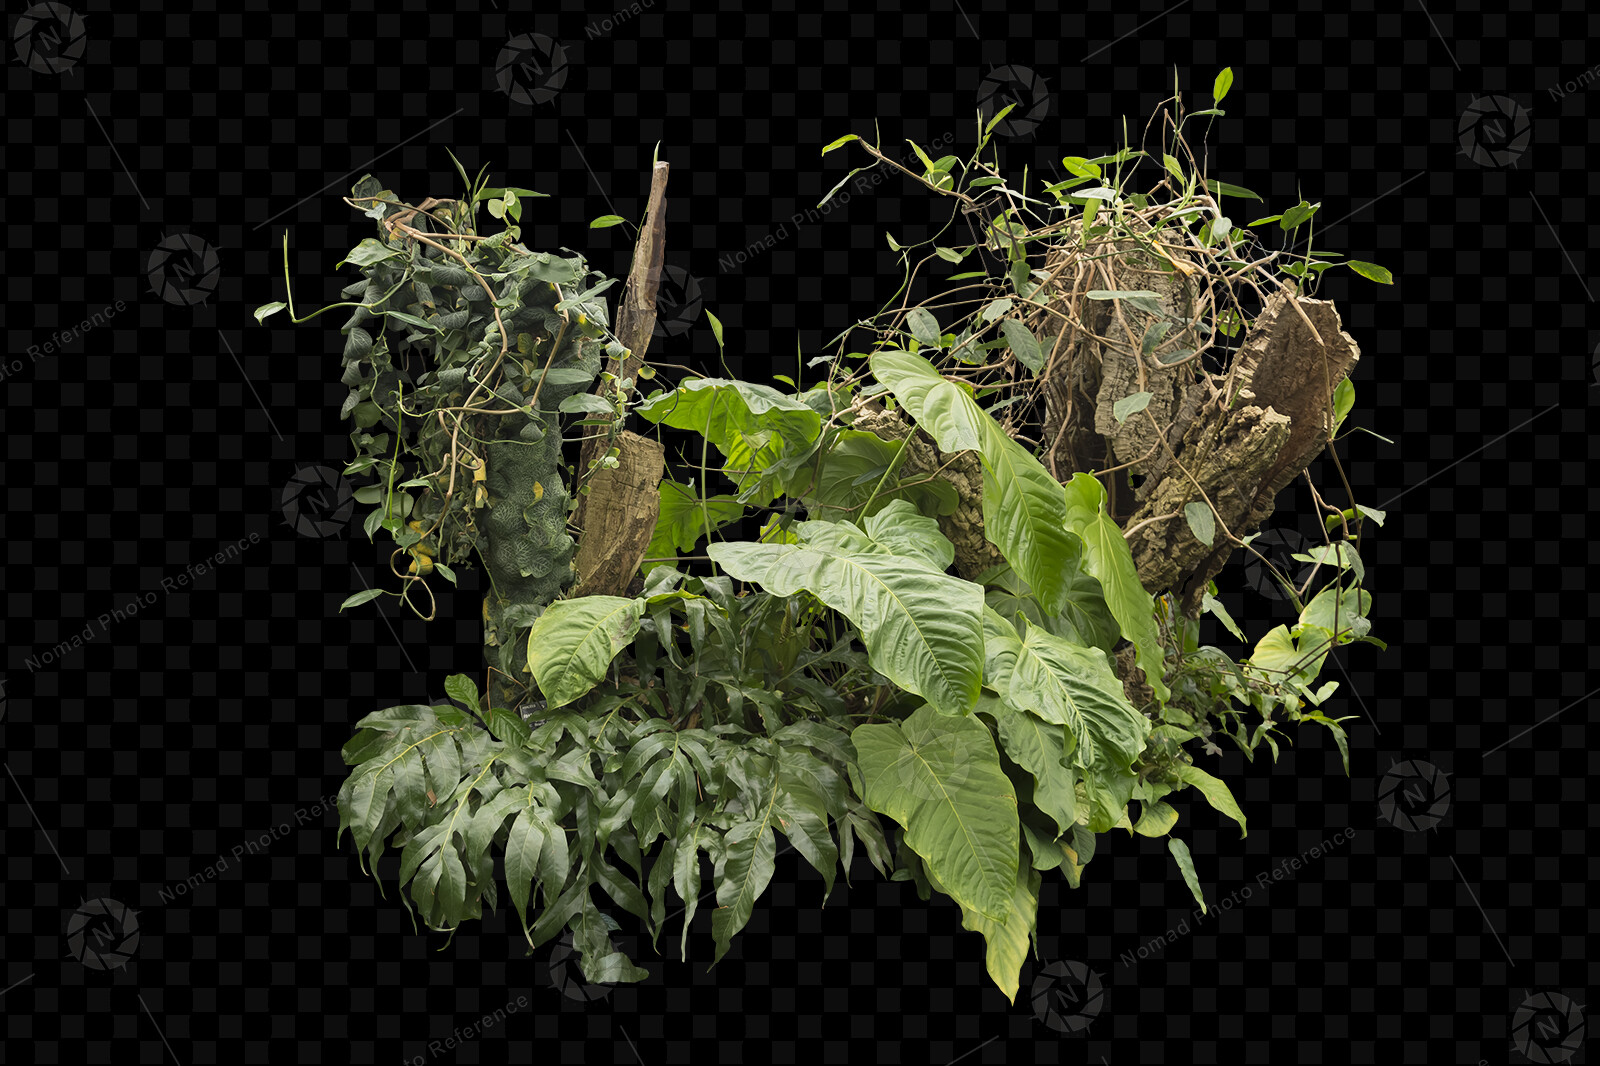 From the PNG Photo Pack: Tropical Foliage 

https://www.artstation.com/a/14810740